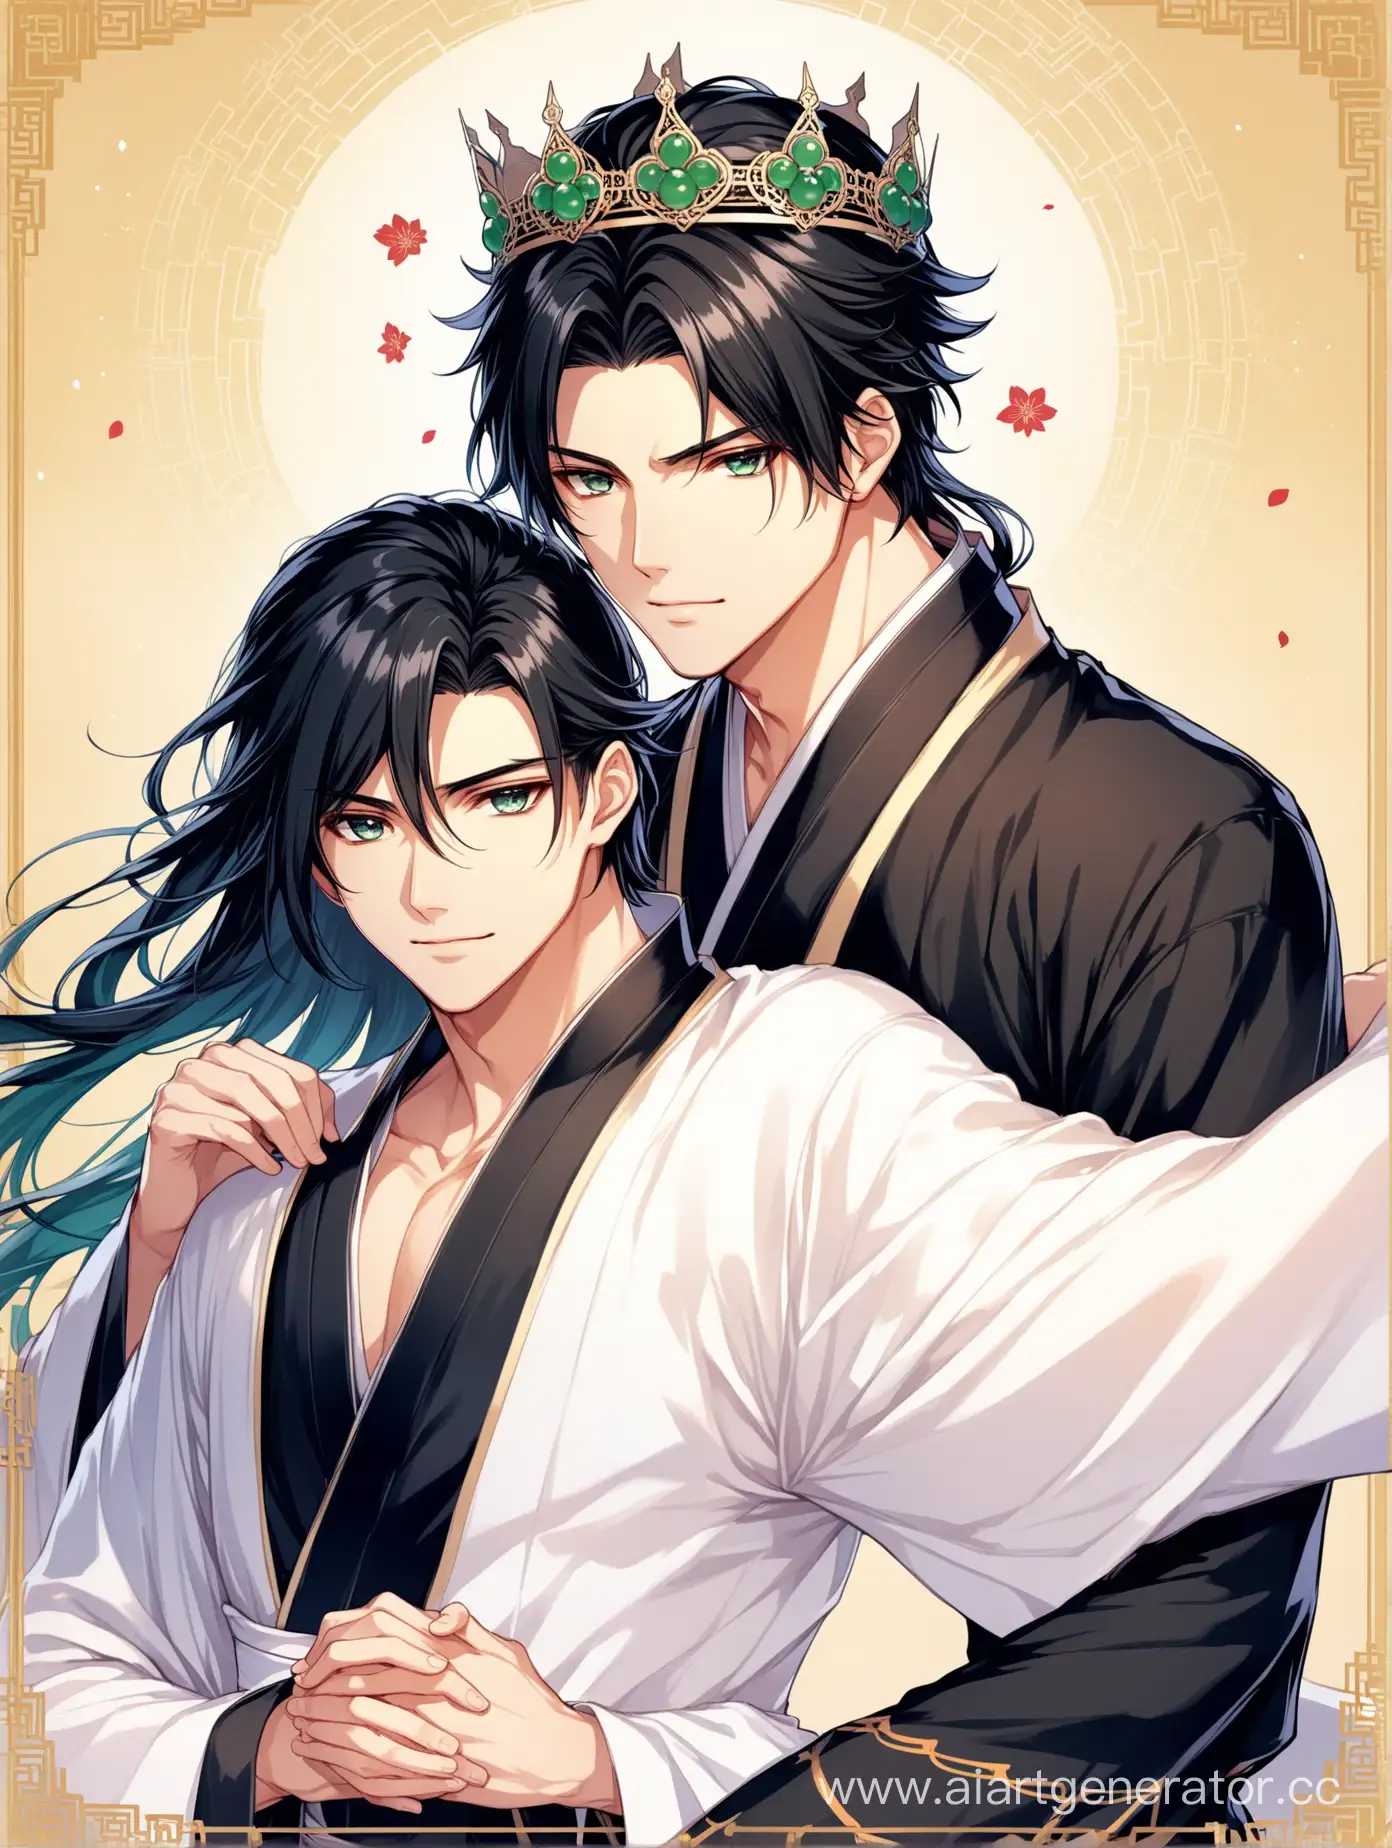 Men's anime couple in white and black hanfu, long black hair with jade crown, beautiful eyes, book cover, xianxia, official art, holding each other hands, beautiful background, book cover style, two handsome men, couple pose, visual novel, art illustration, sketchbook 